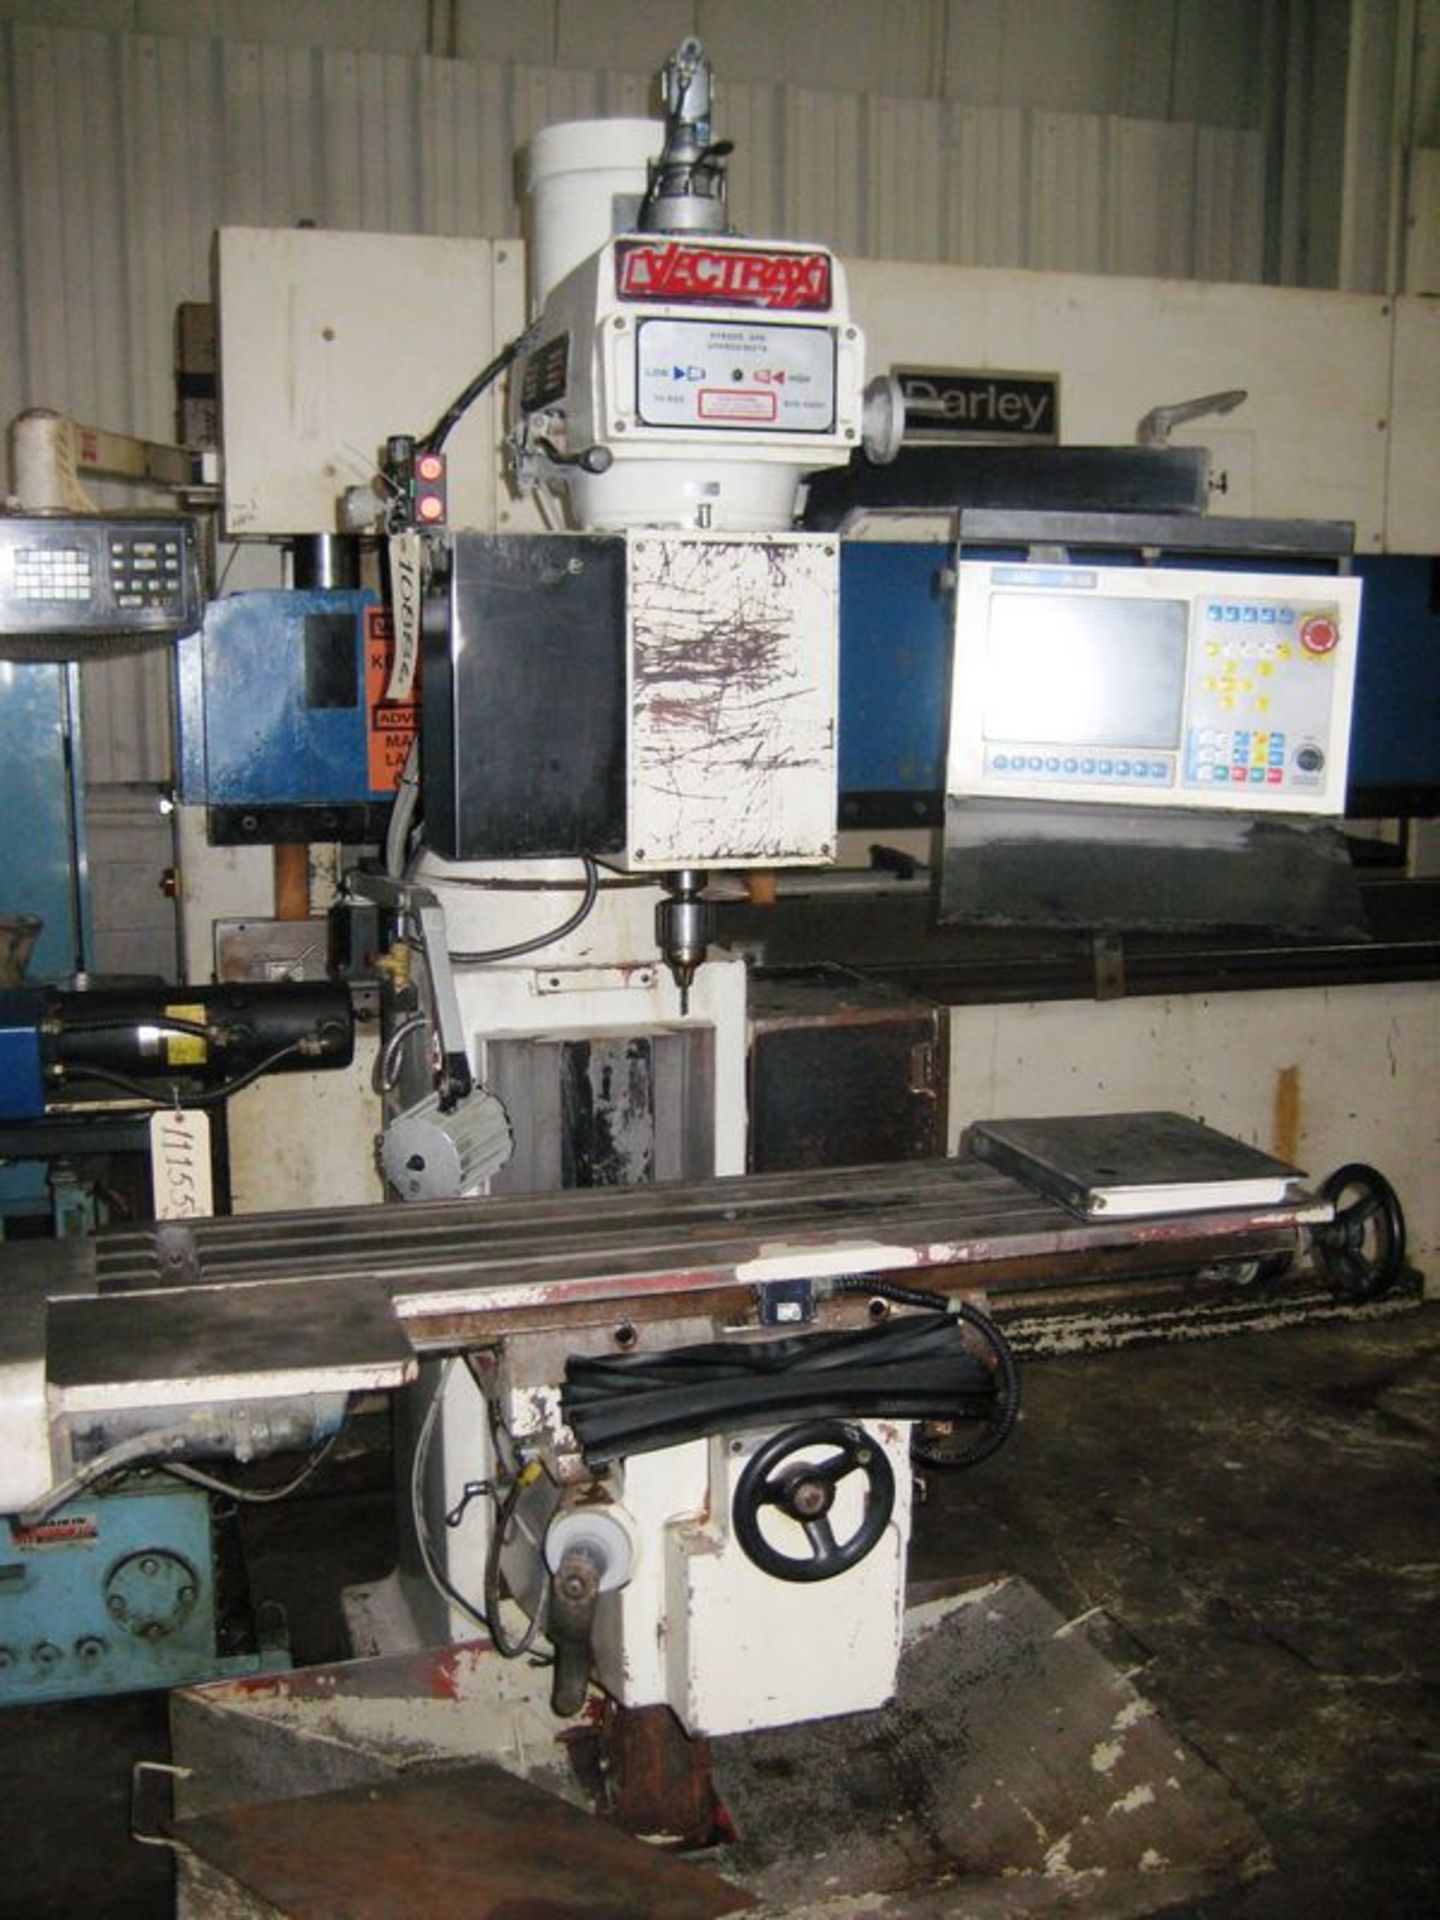 Vectrax GS-N16V 3-Axis CNC Knee Type Milling Machine, S/N 9030192NV, New 2001 General